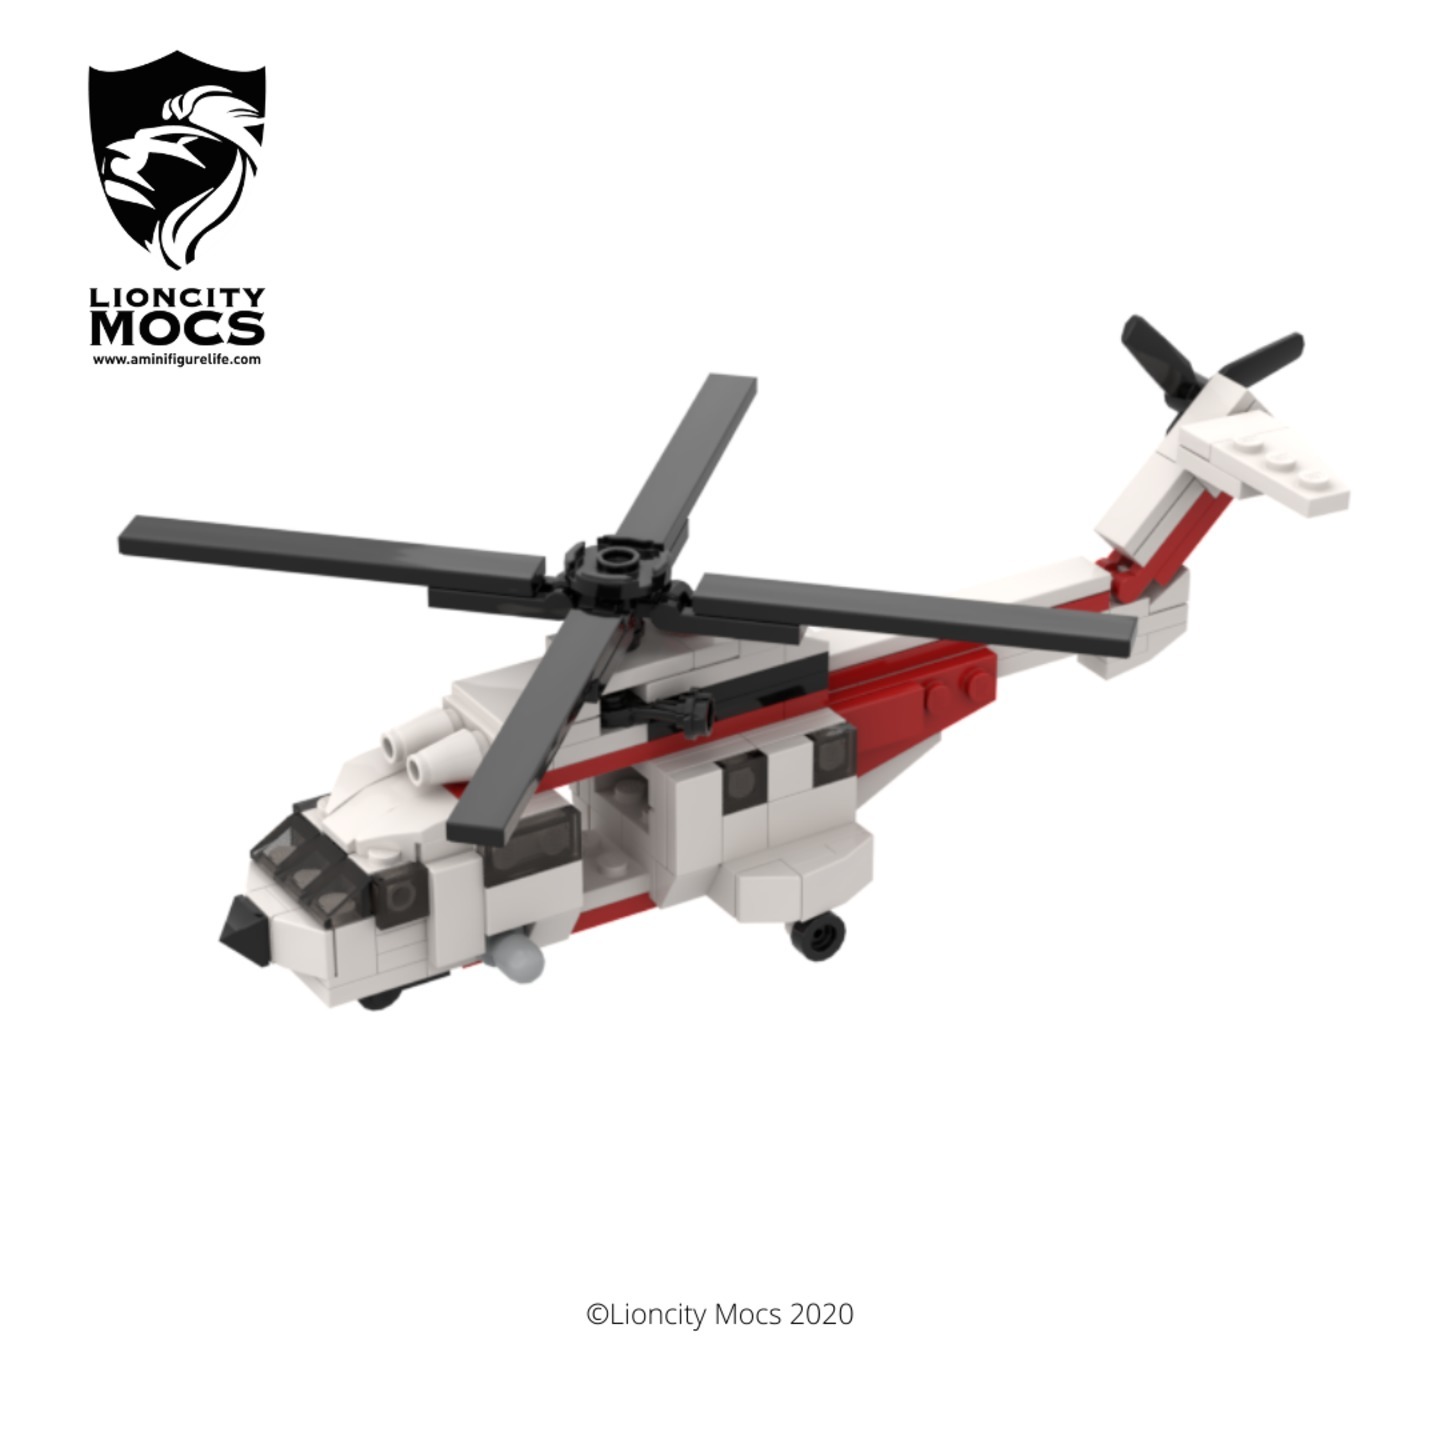 [PDF Instructions Only] AS-332M1 Superpuma Rescue Helicopter Mini